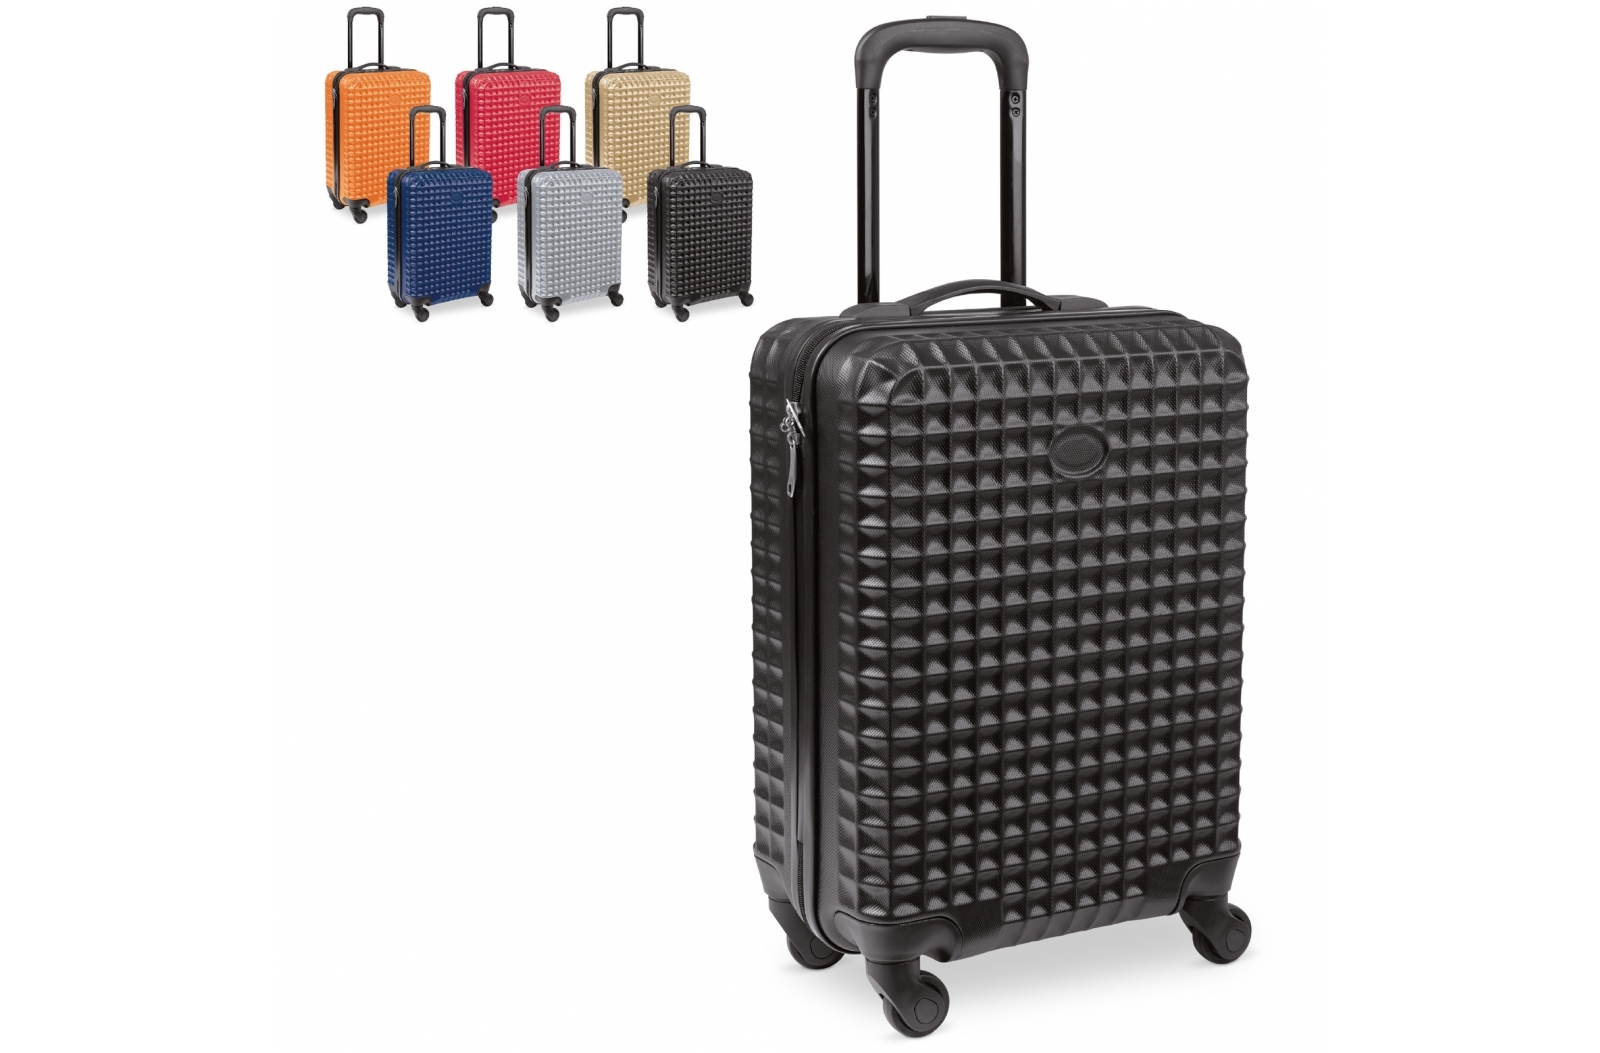 Suitcase with spinning wheels that is suitable for cabin storage - Prudhoe